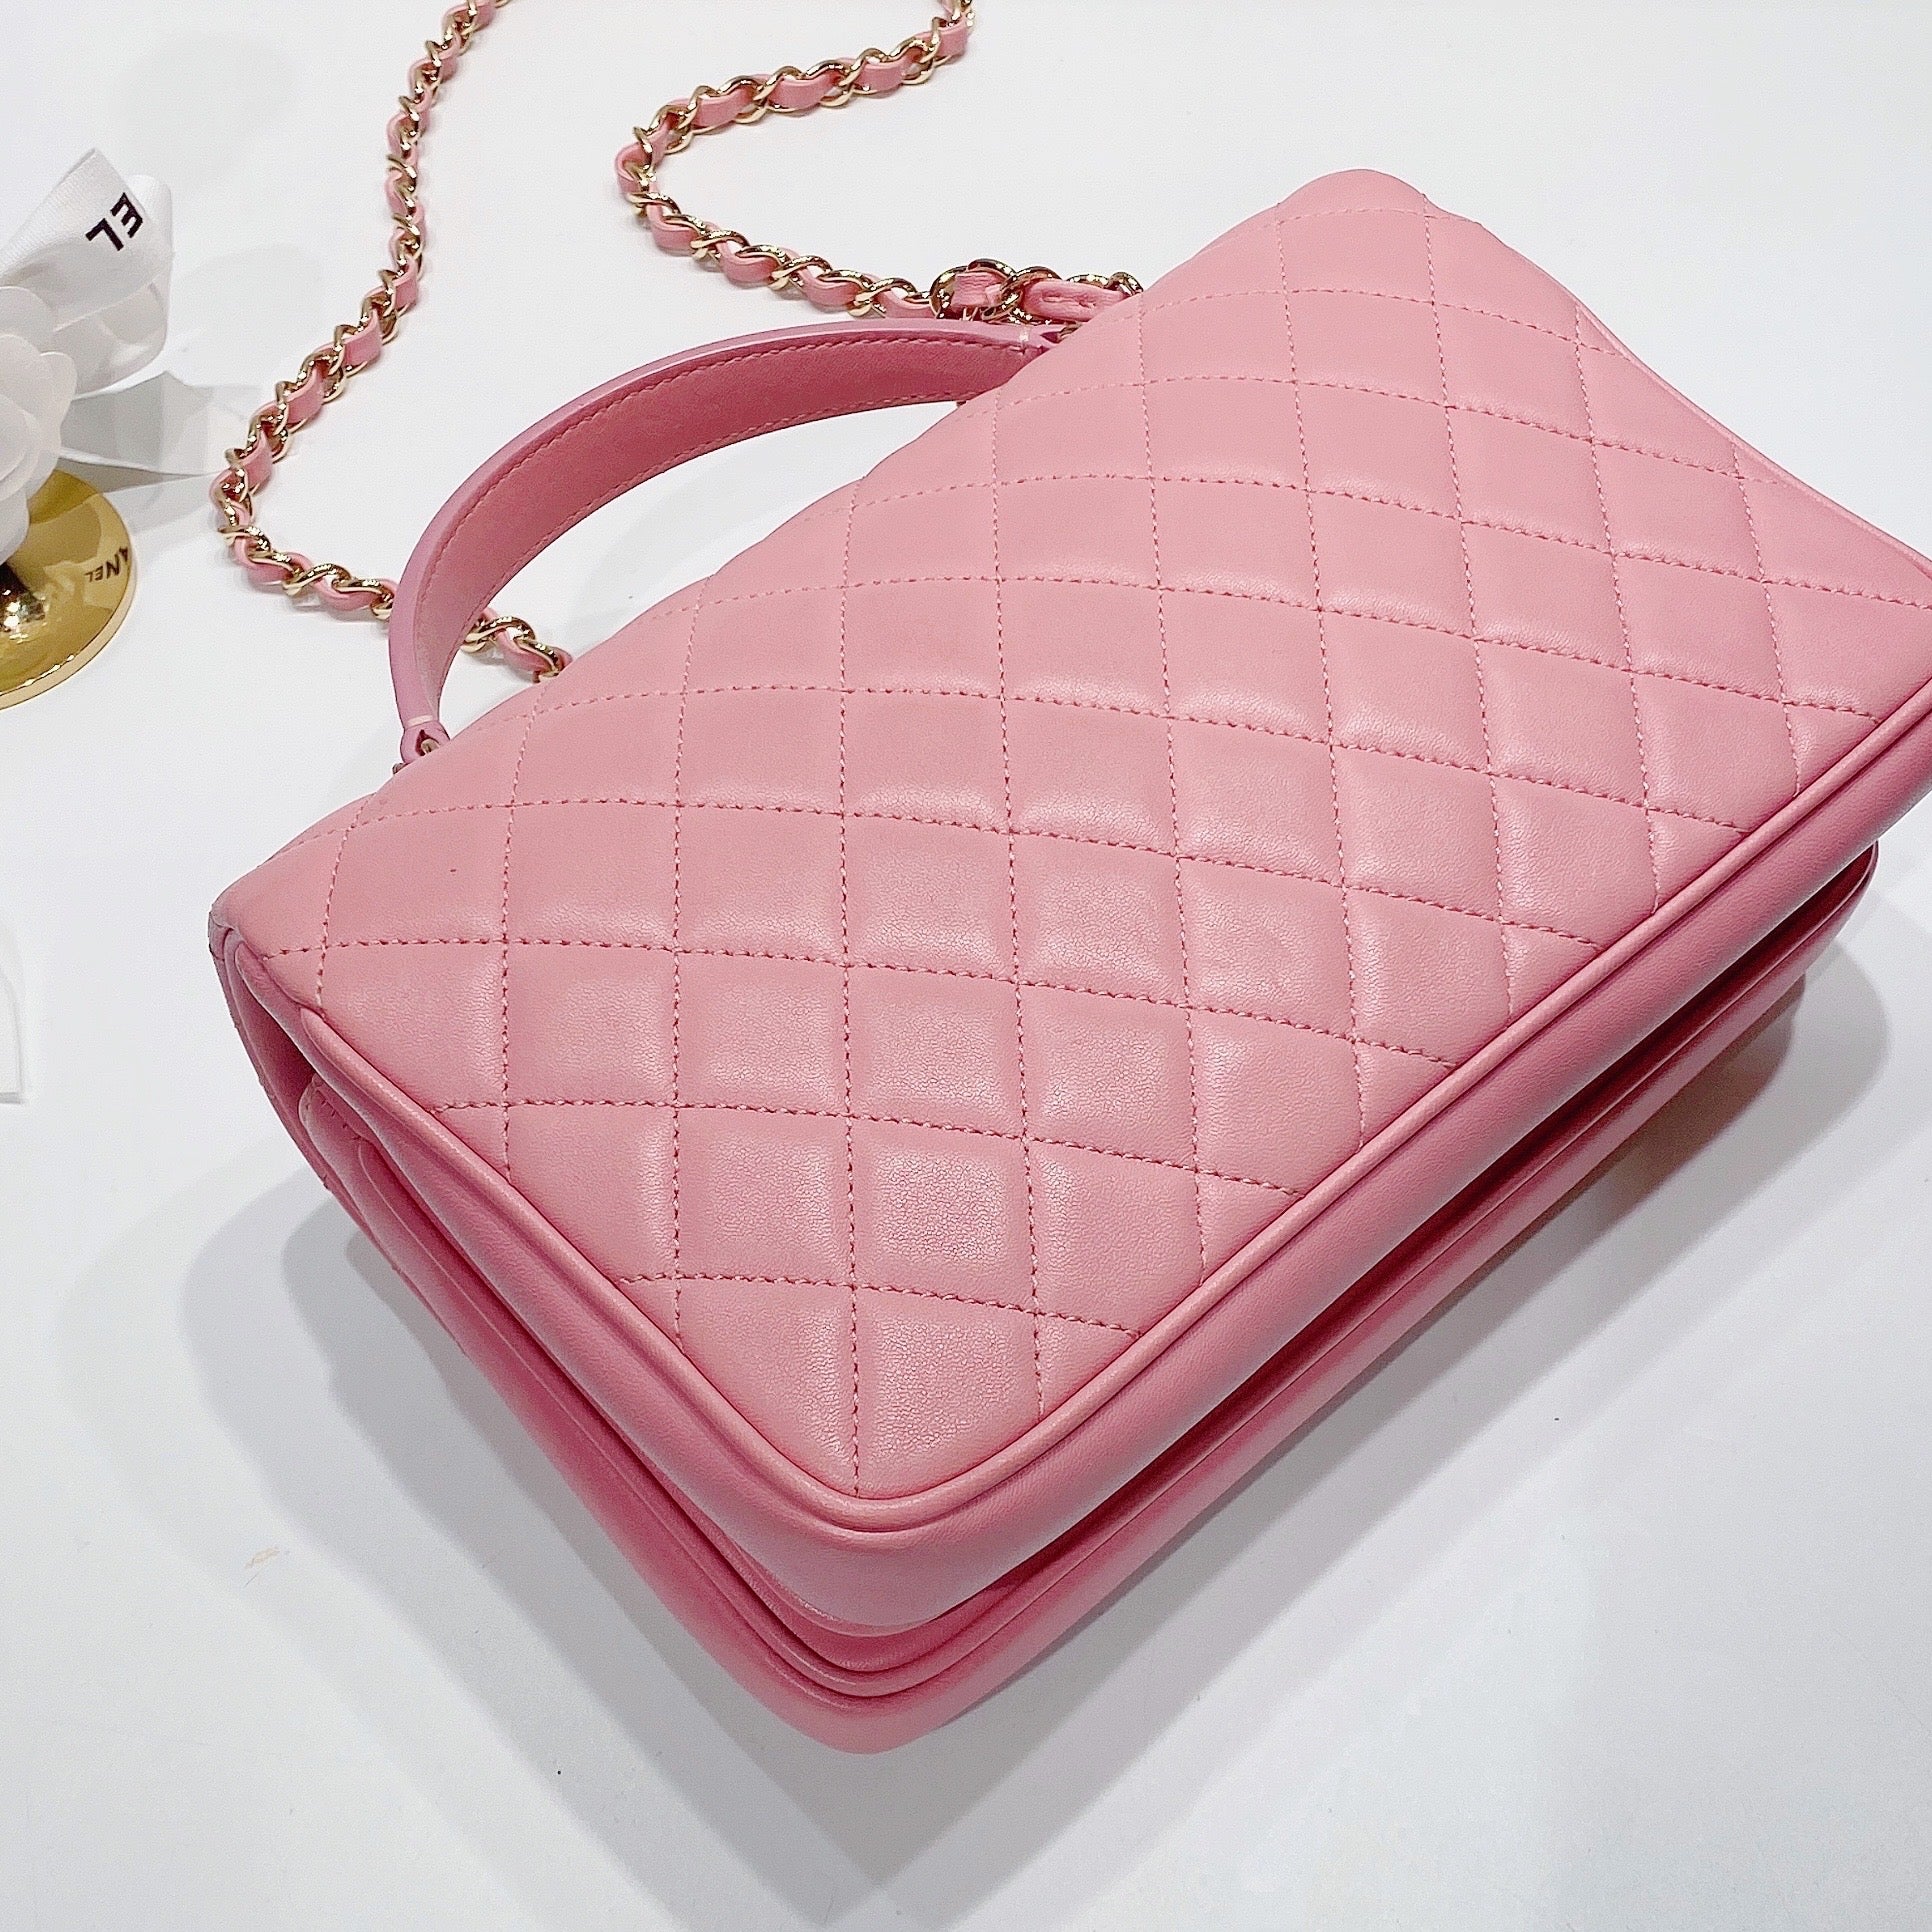 💕Super Gorgeous!💕 Rare Chanel Citizen Chic Small Flap in Pink